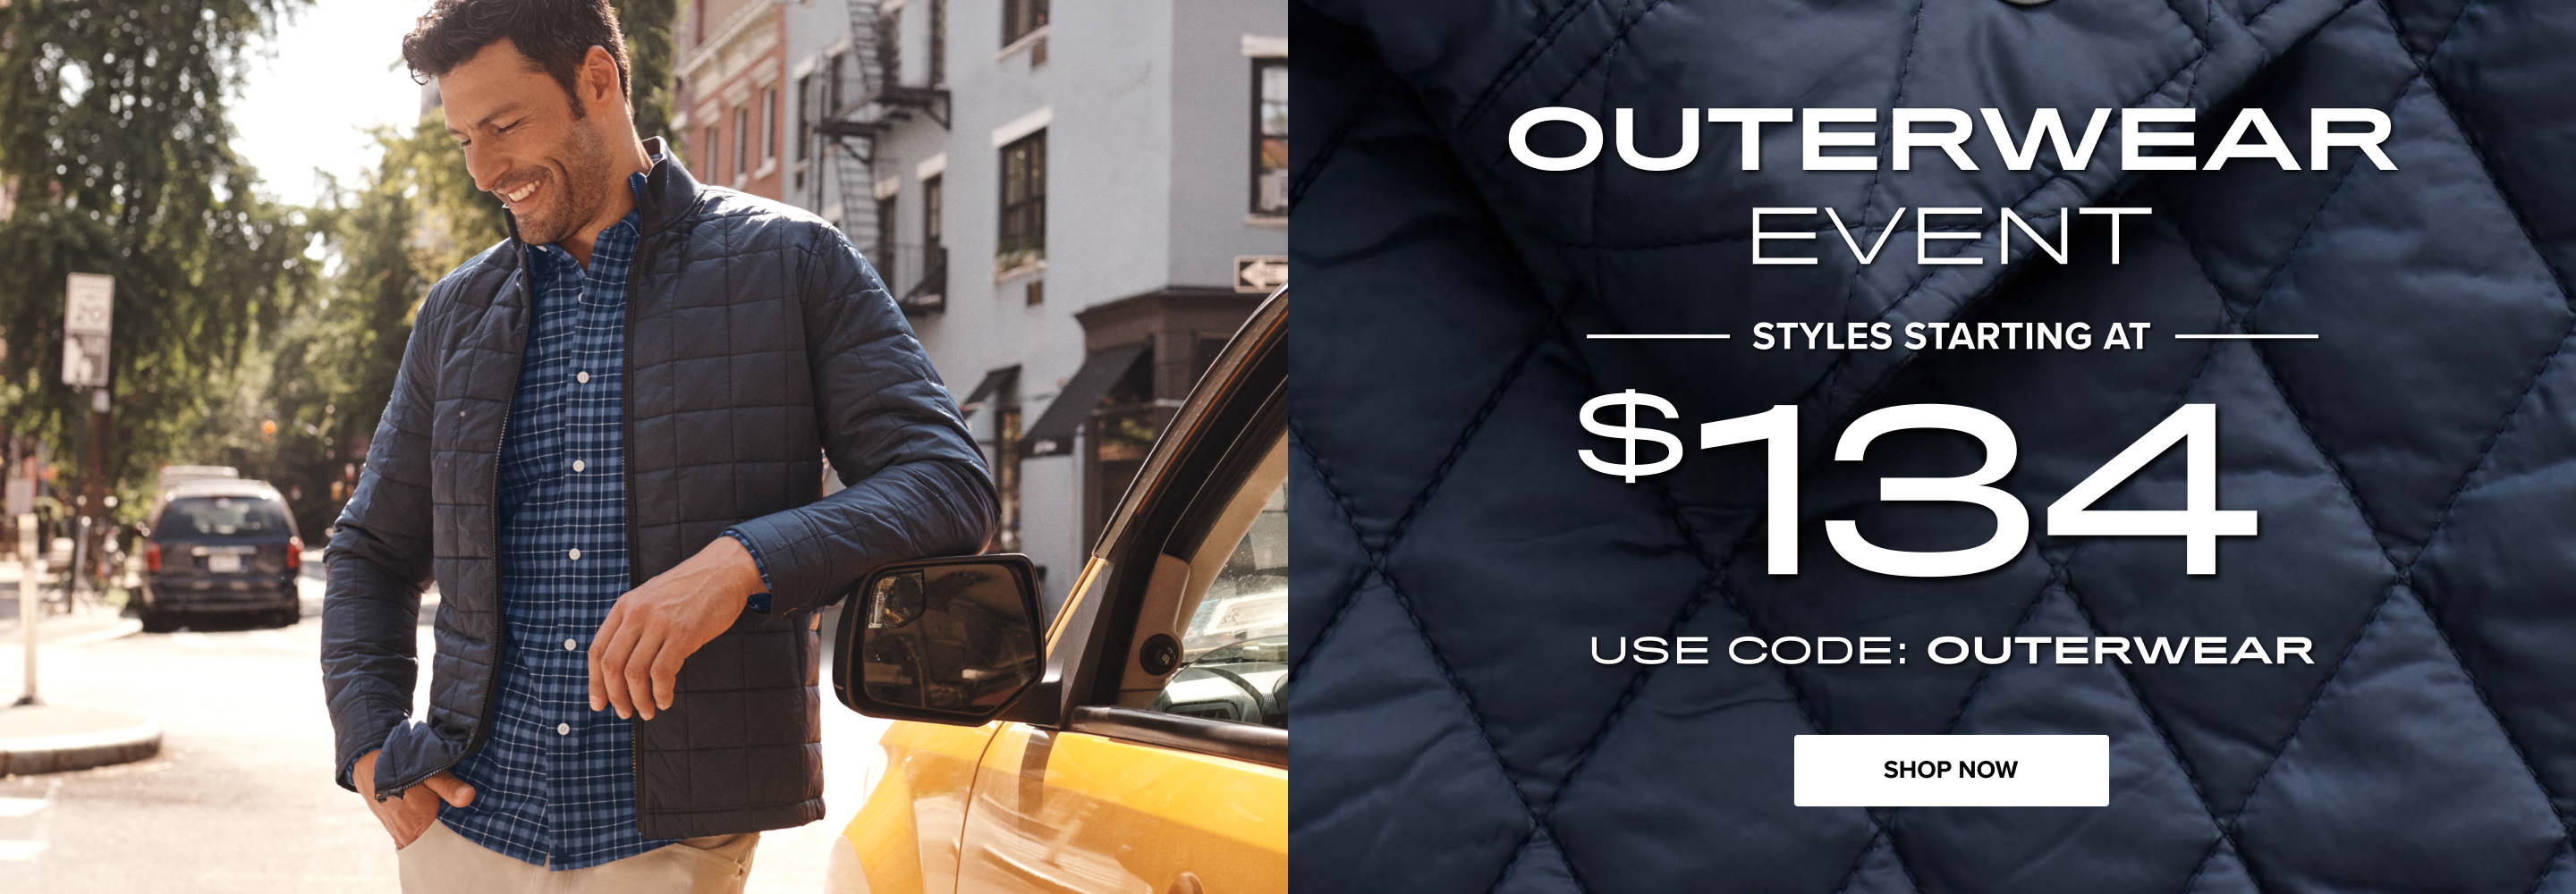 Outerwear Event. Styles starting at $134. Use code OUTERWEAR